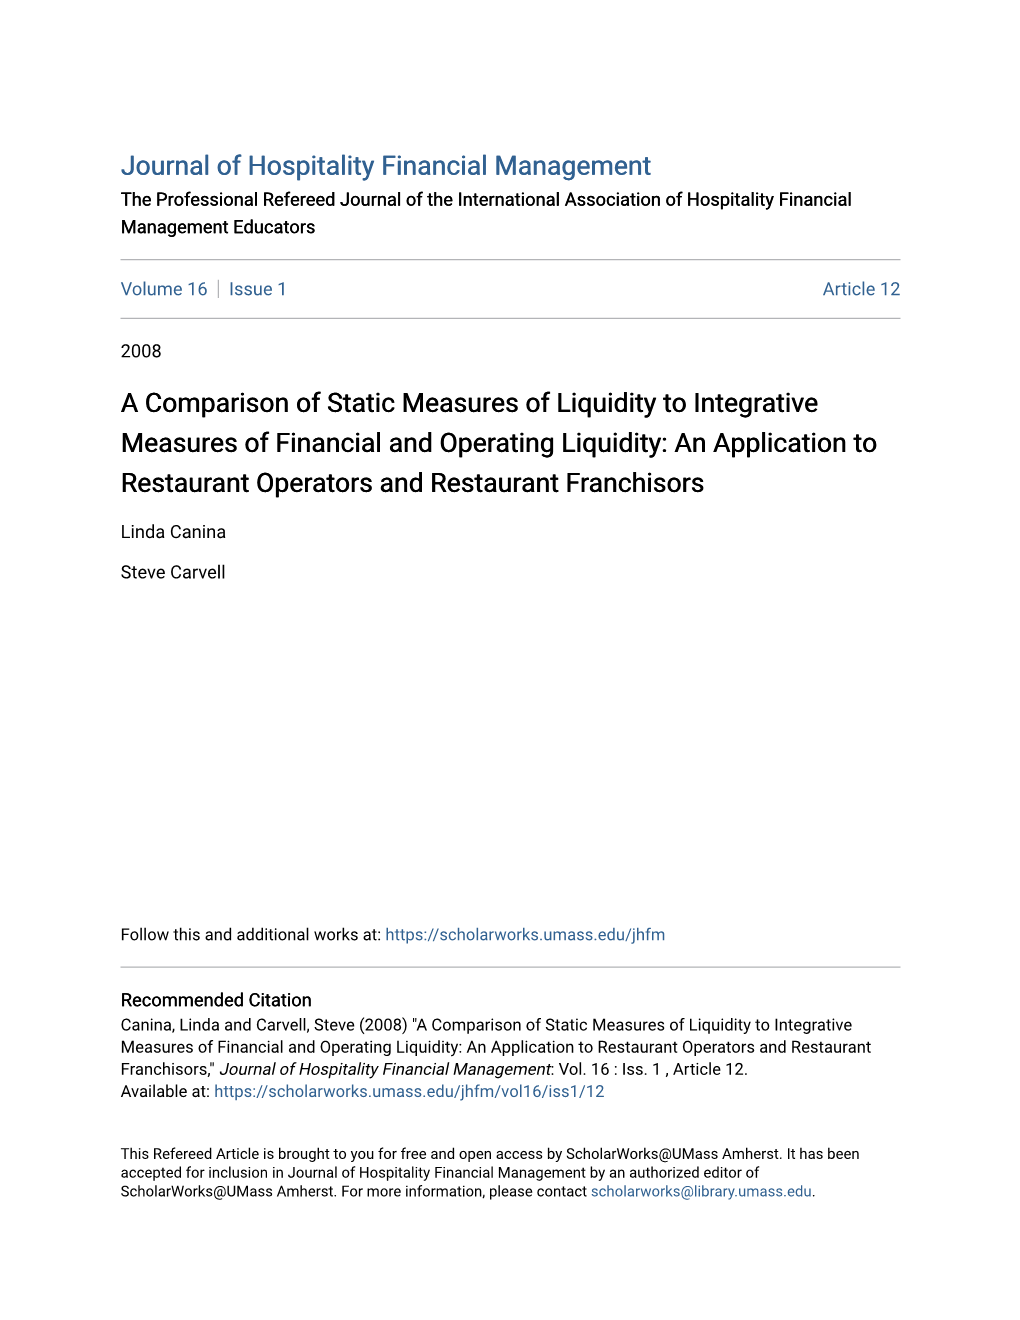 A Comparison of Static Measures of Liquidity to Integrative Measures Of